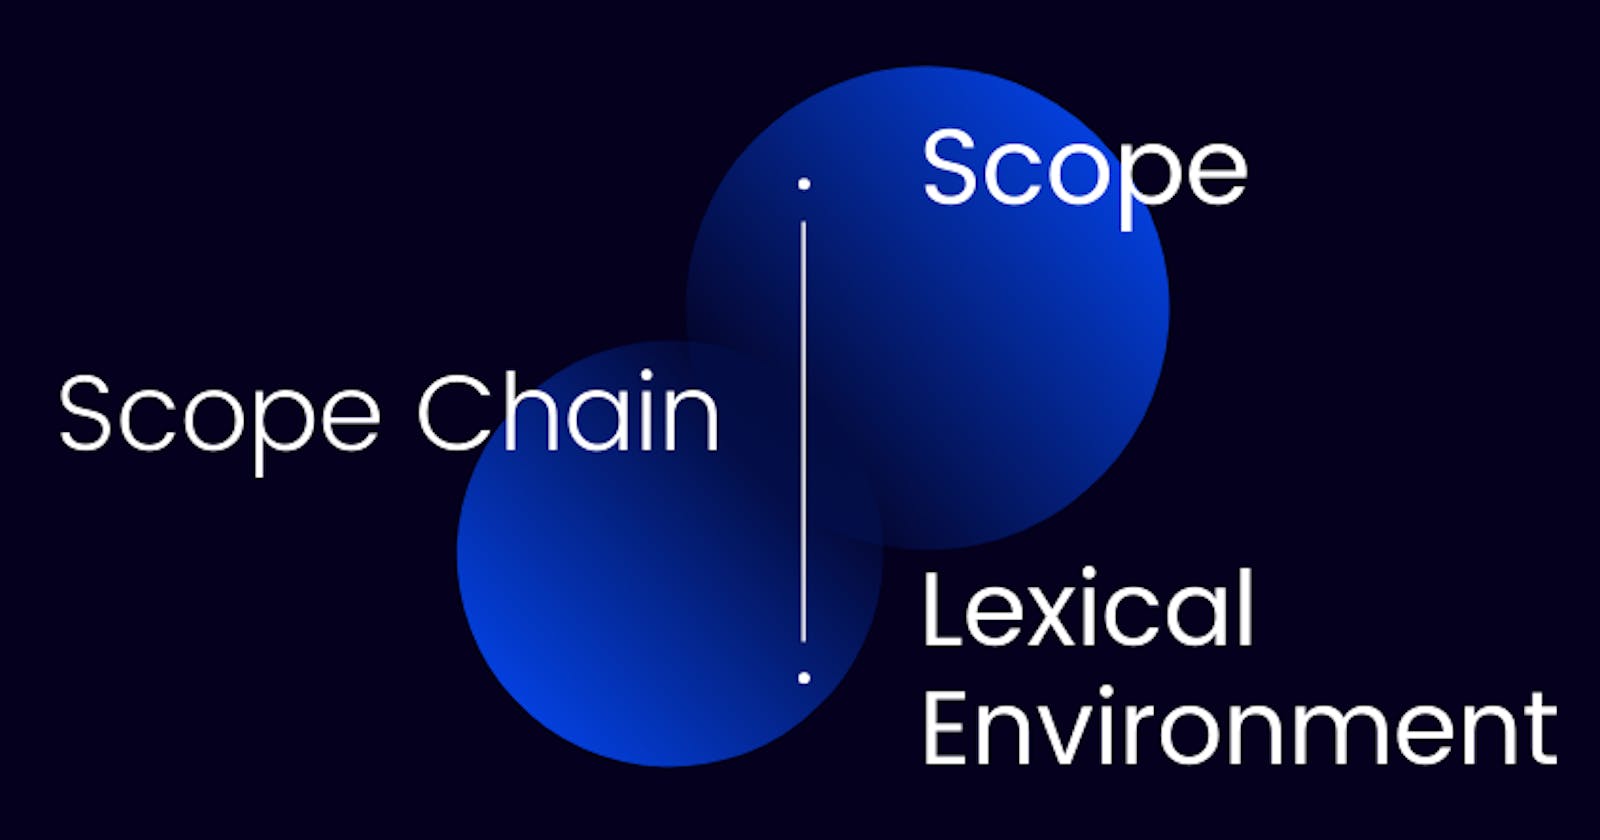 Scope, Scope Chain and Lexical Environment